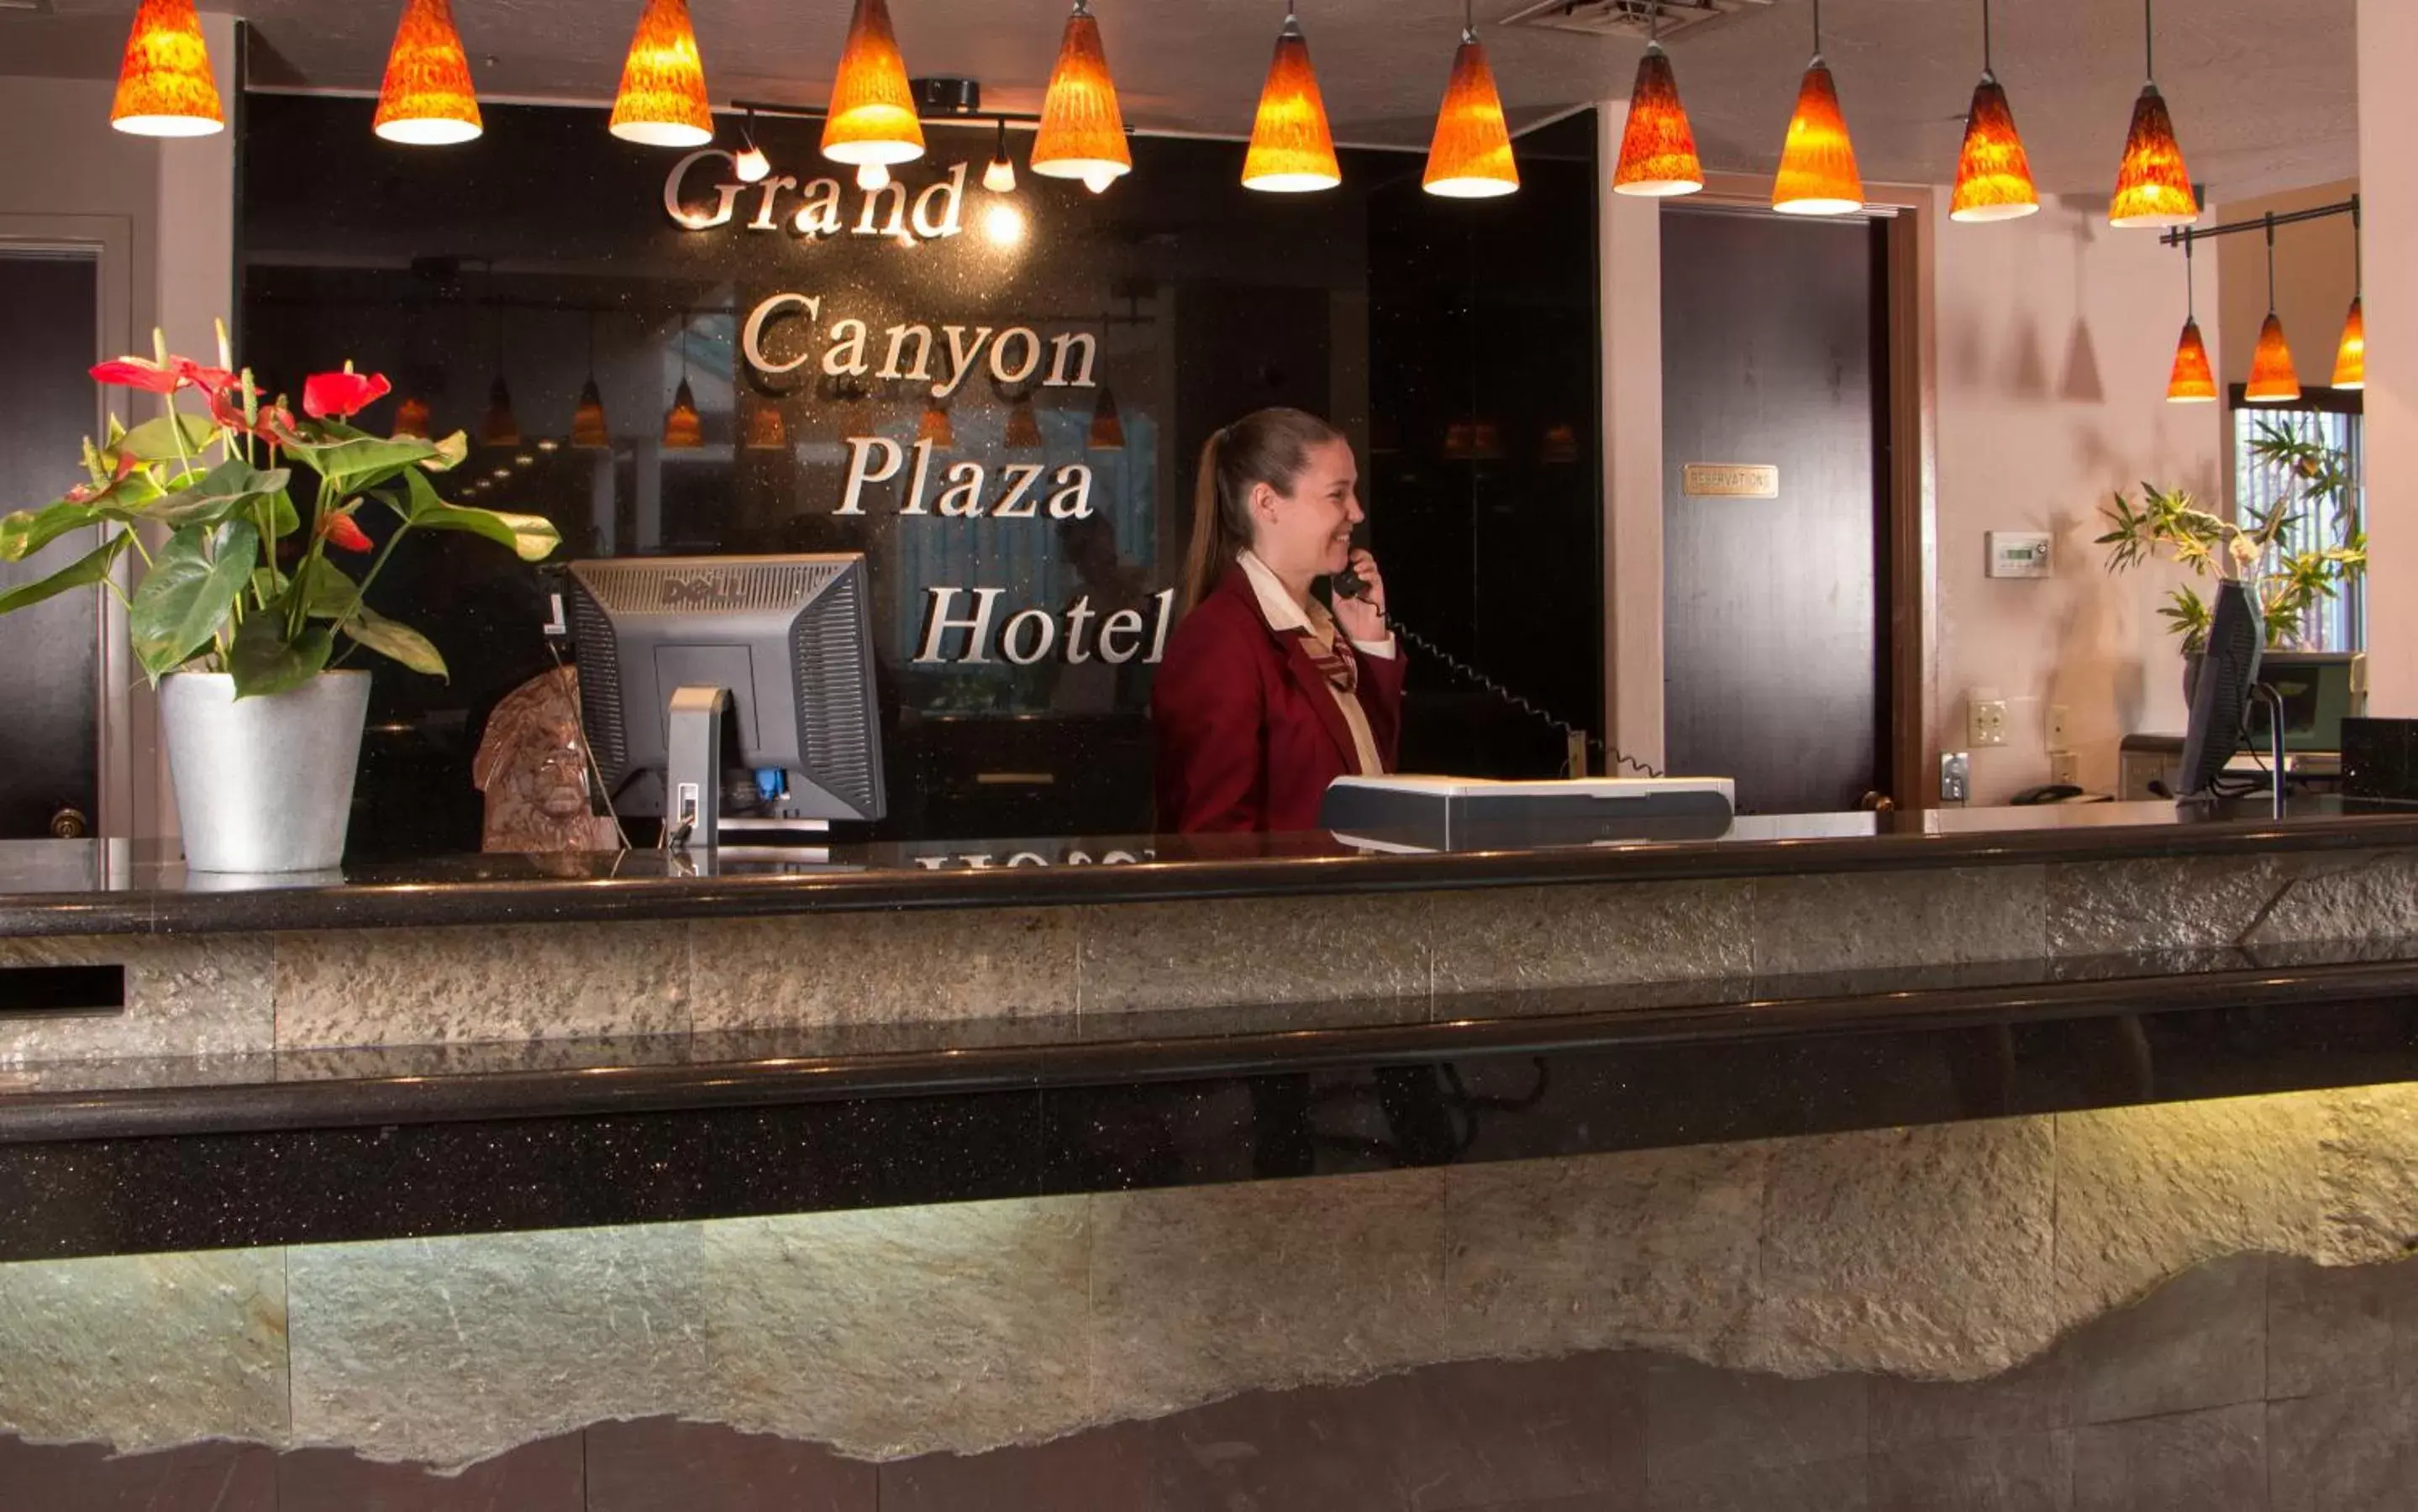 Staff in Grand Canyon Plaza Hotel